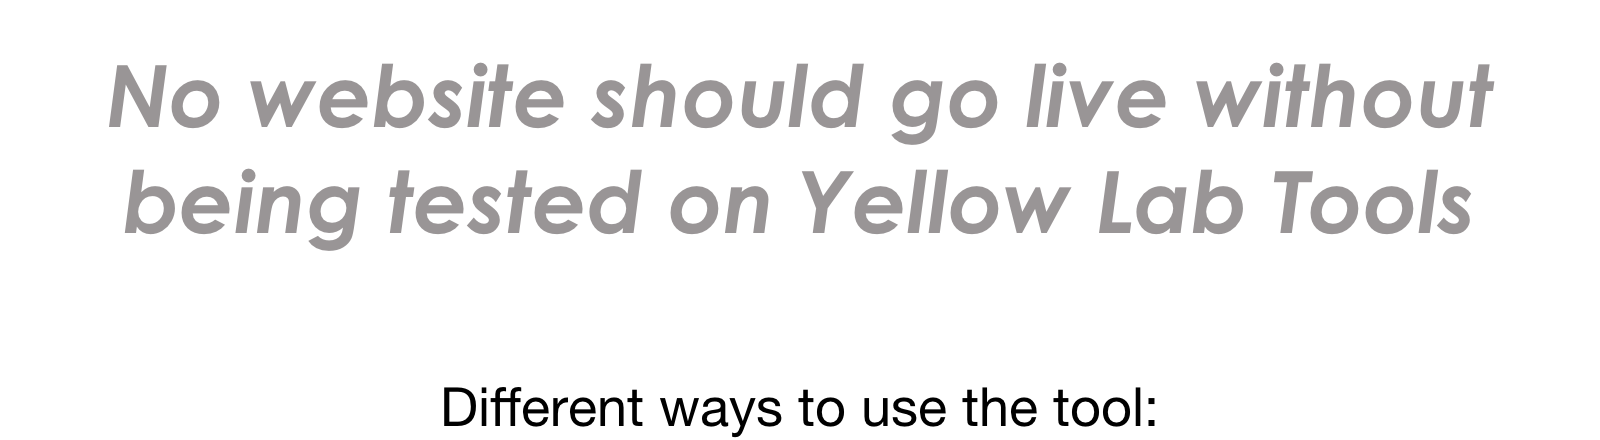 No website should go live without being tested with Yellow Lab Tools